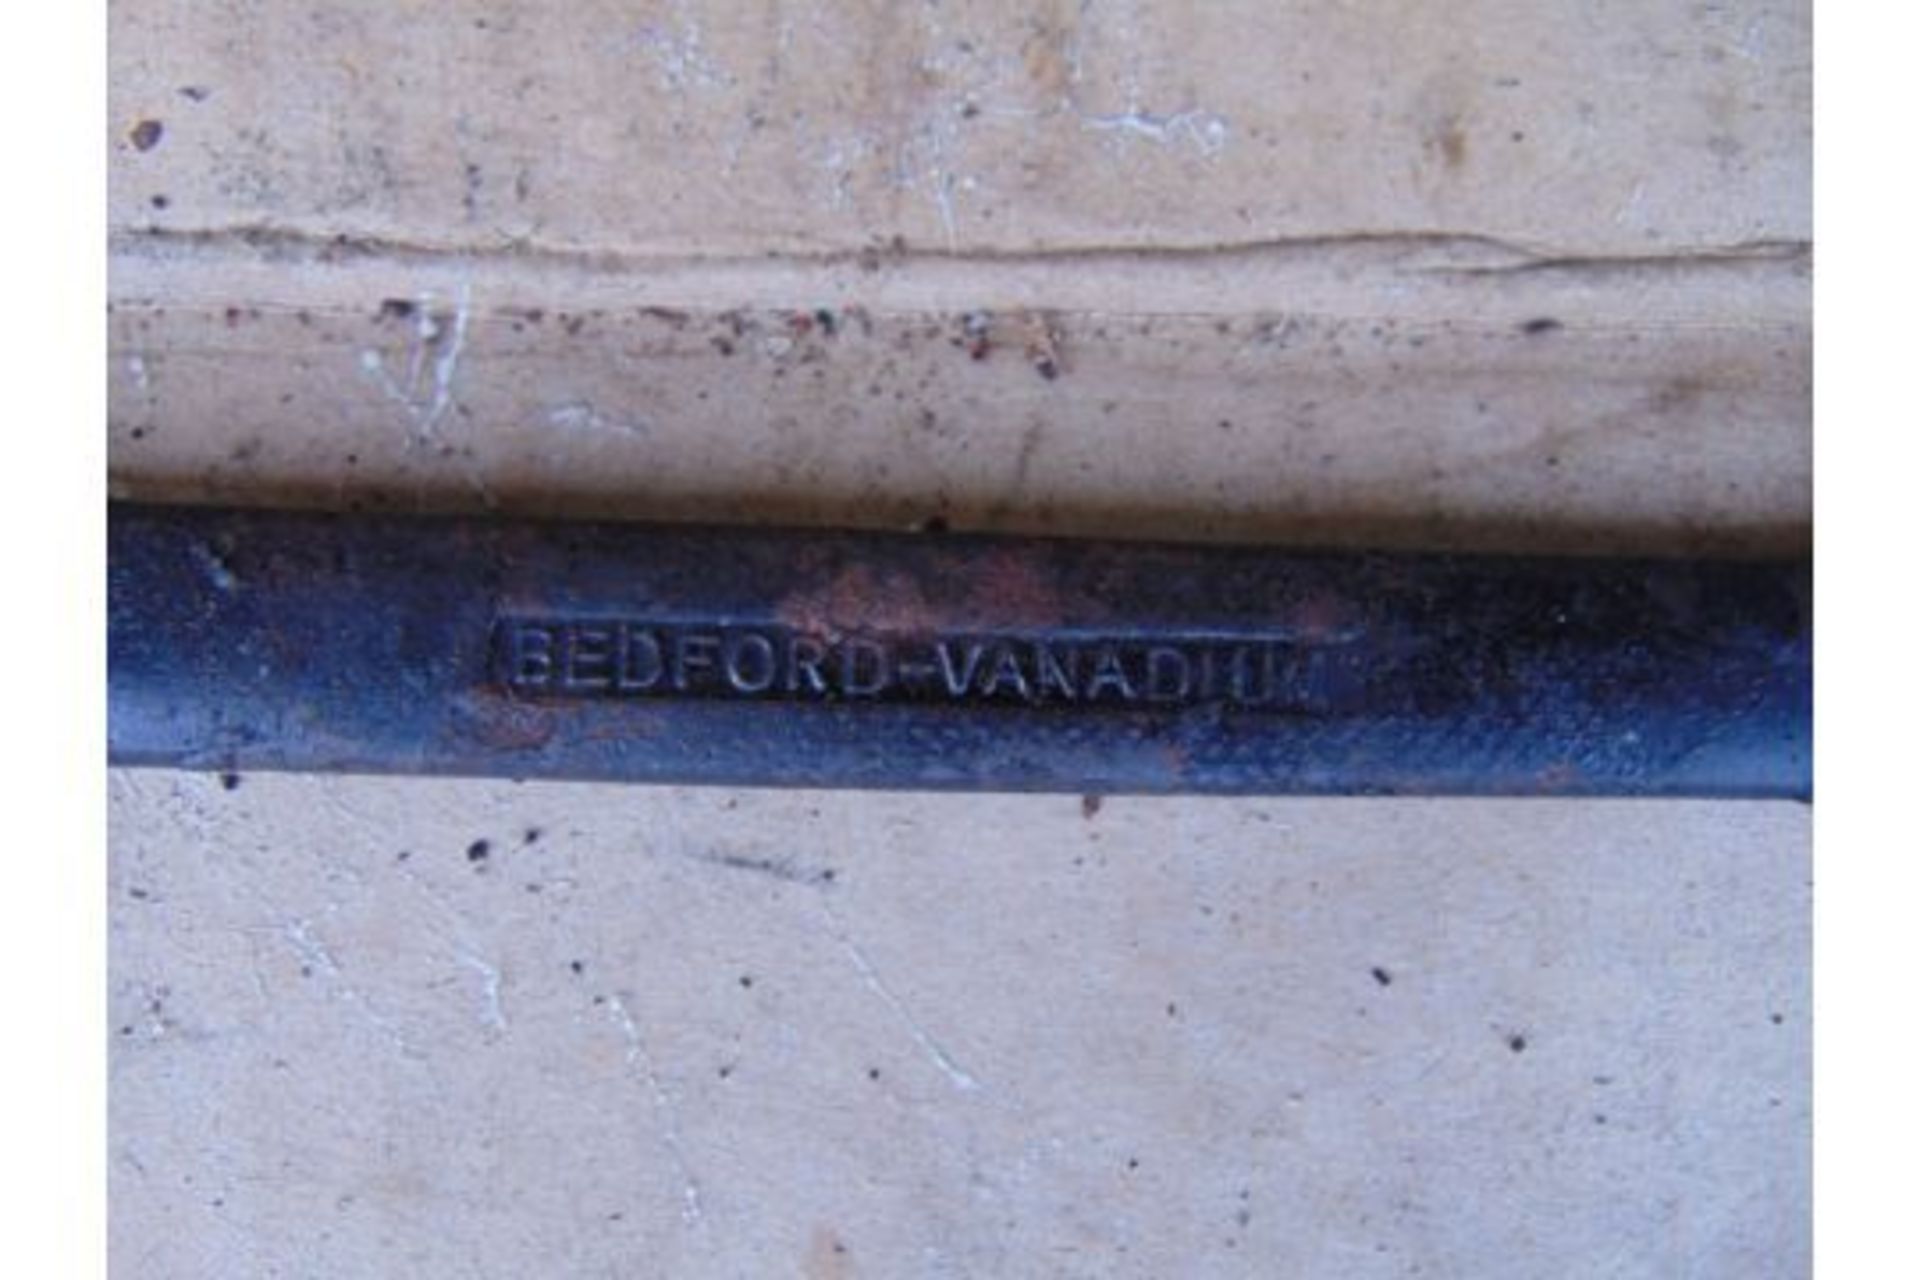 Very Rare Genuine Bedford RL Tool Kit and Roll Complete Marked Bedford Vanadium - Image 4 of 5